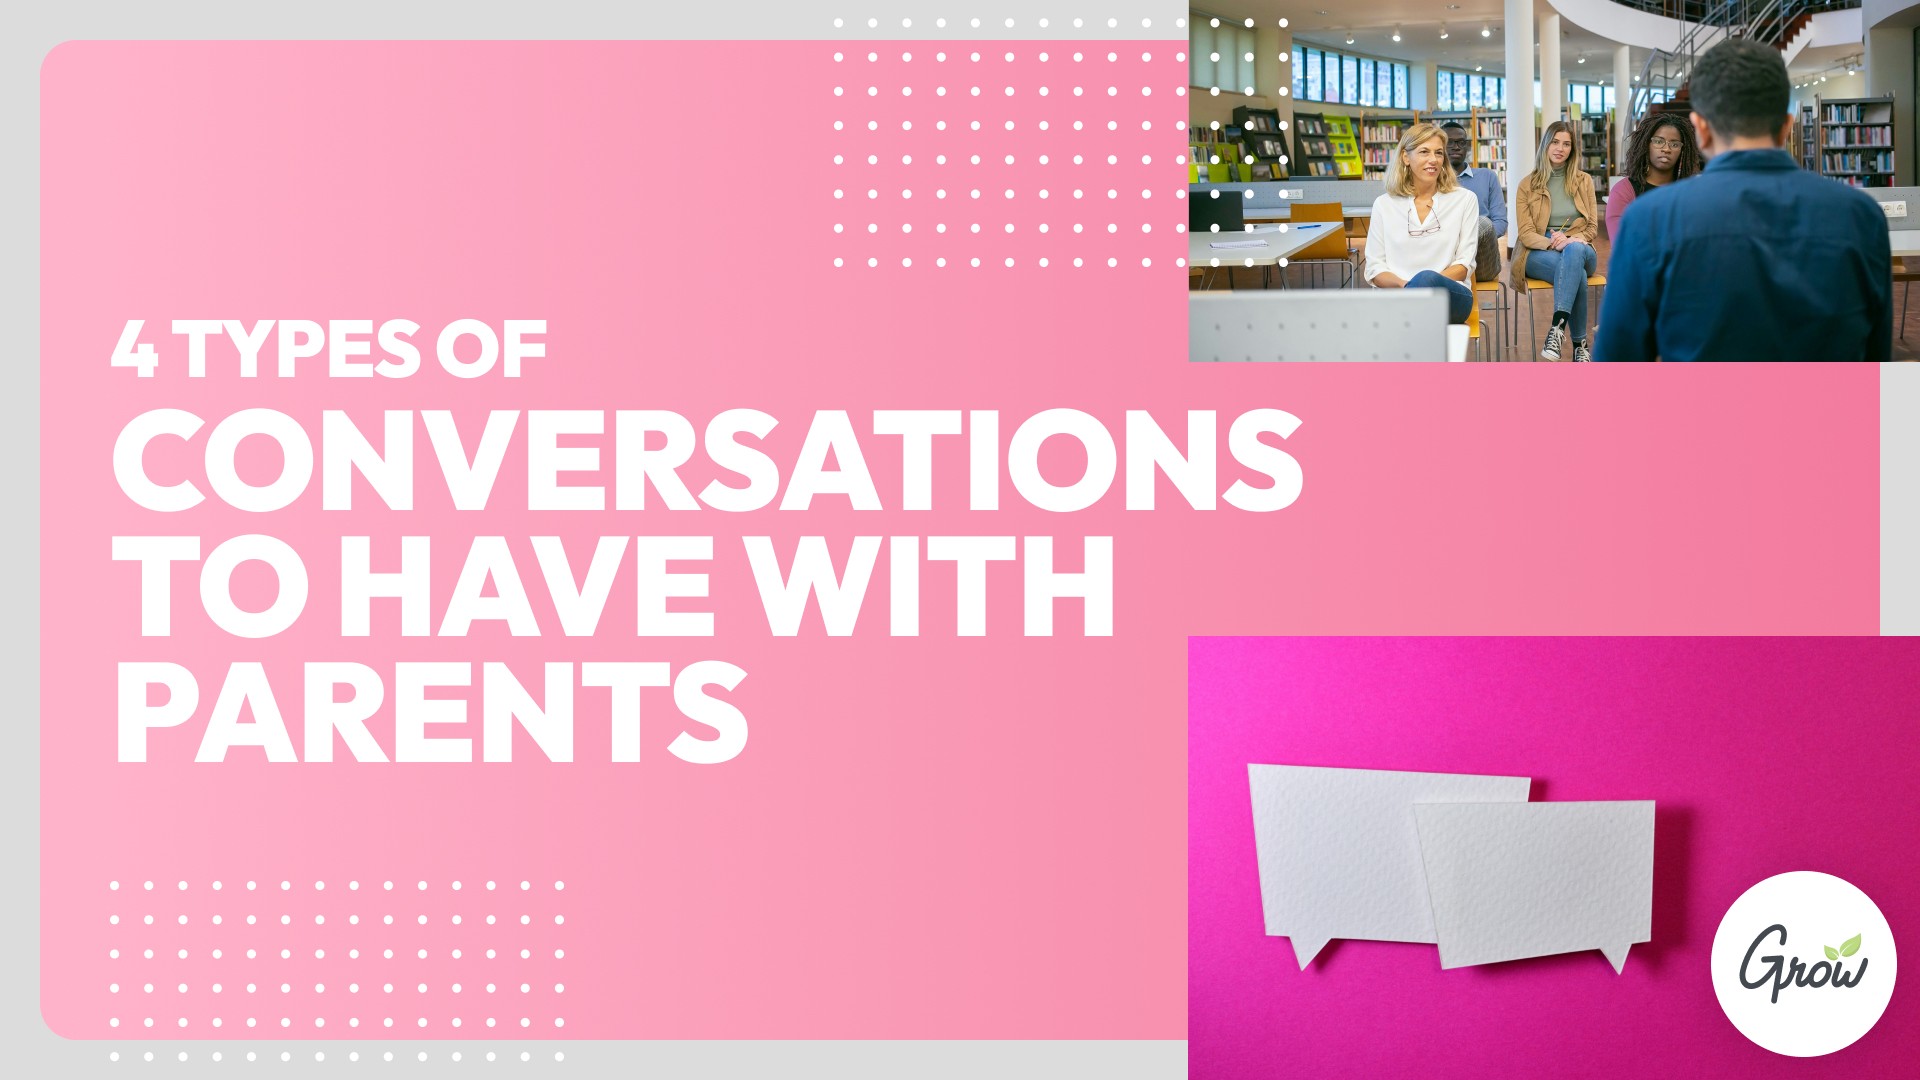 4 Important Conversations to Have With Parents This Year